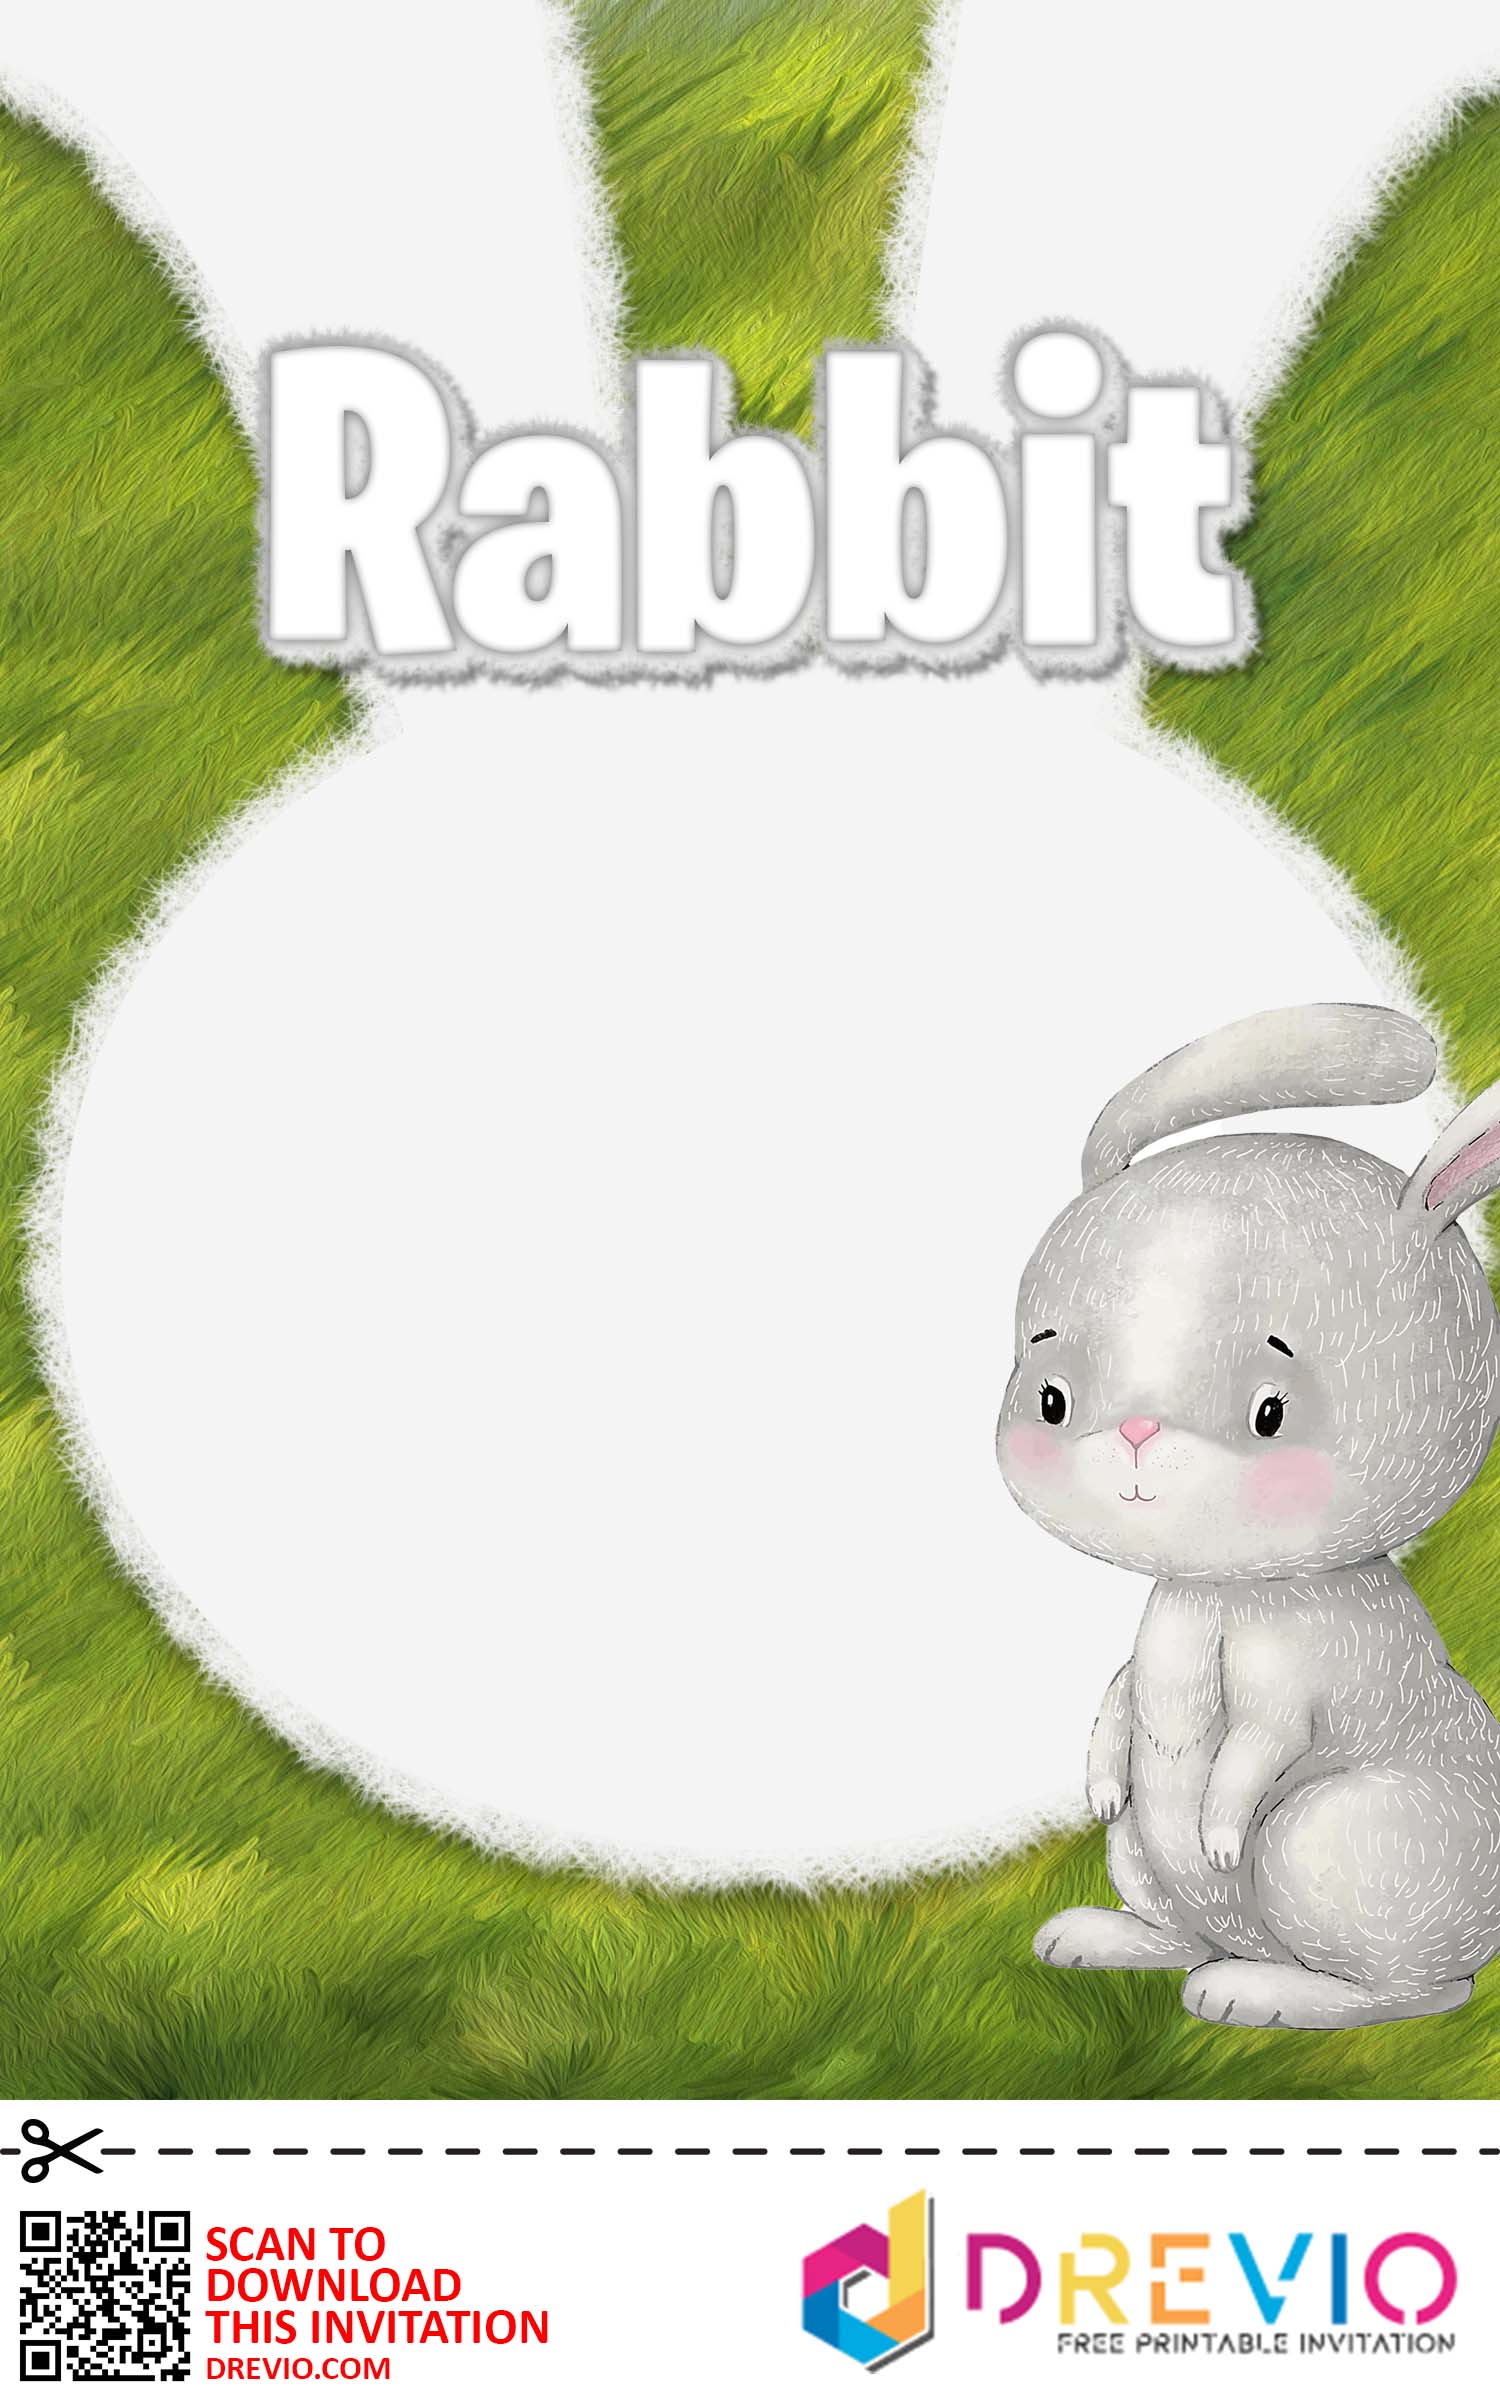 Baby Bio With Rabbit Theme Template Download on Pngtree